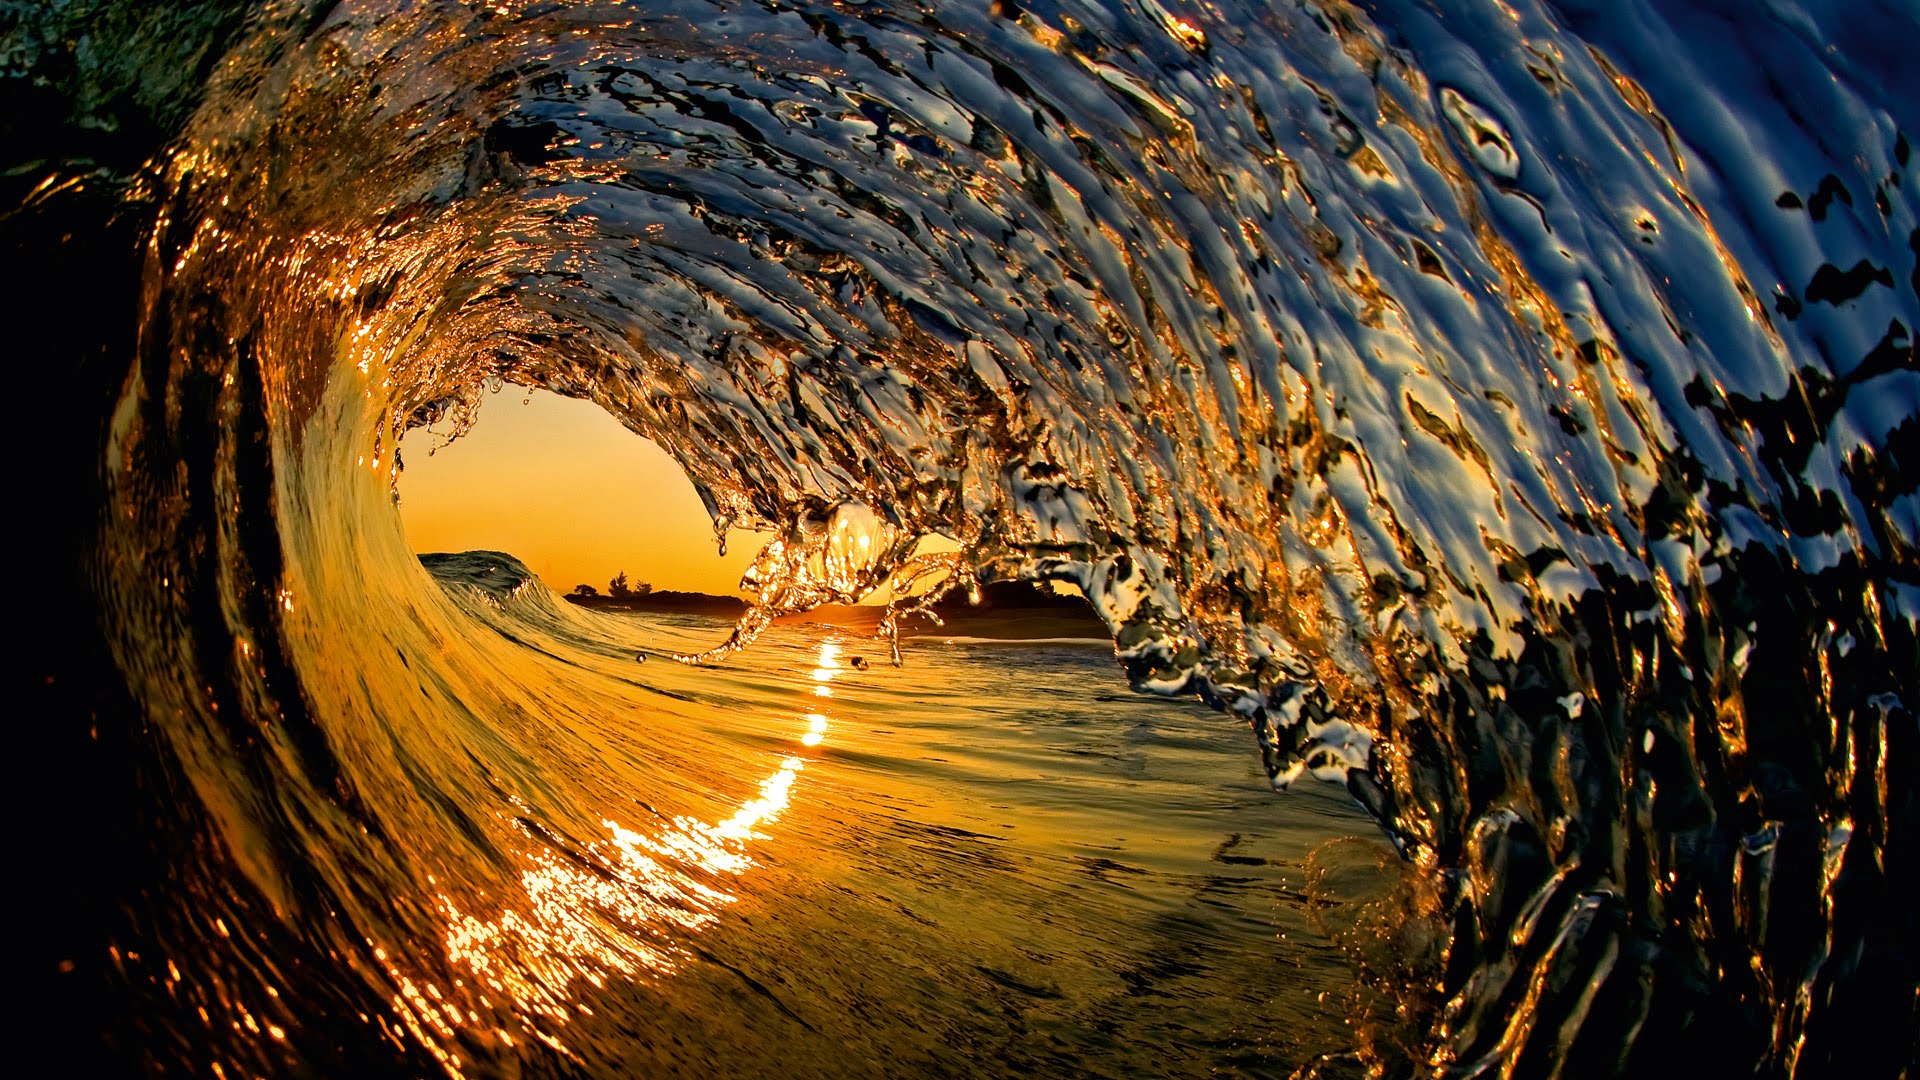 Inter With The Ultimate Wave Photographer Clark Little I Am